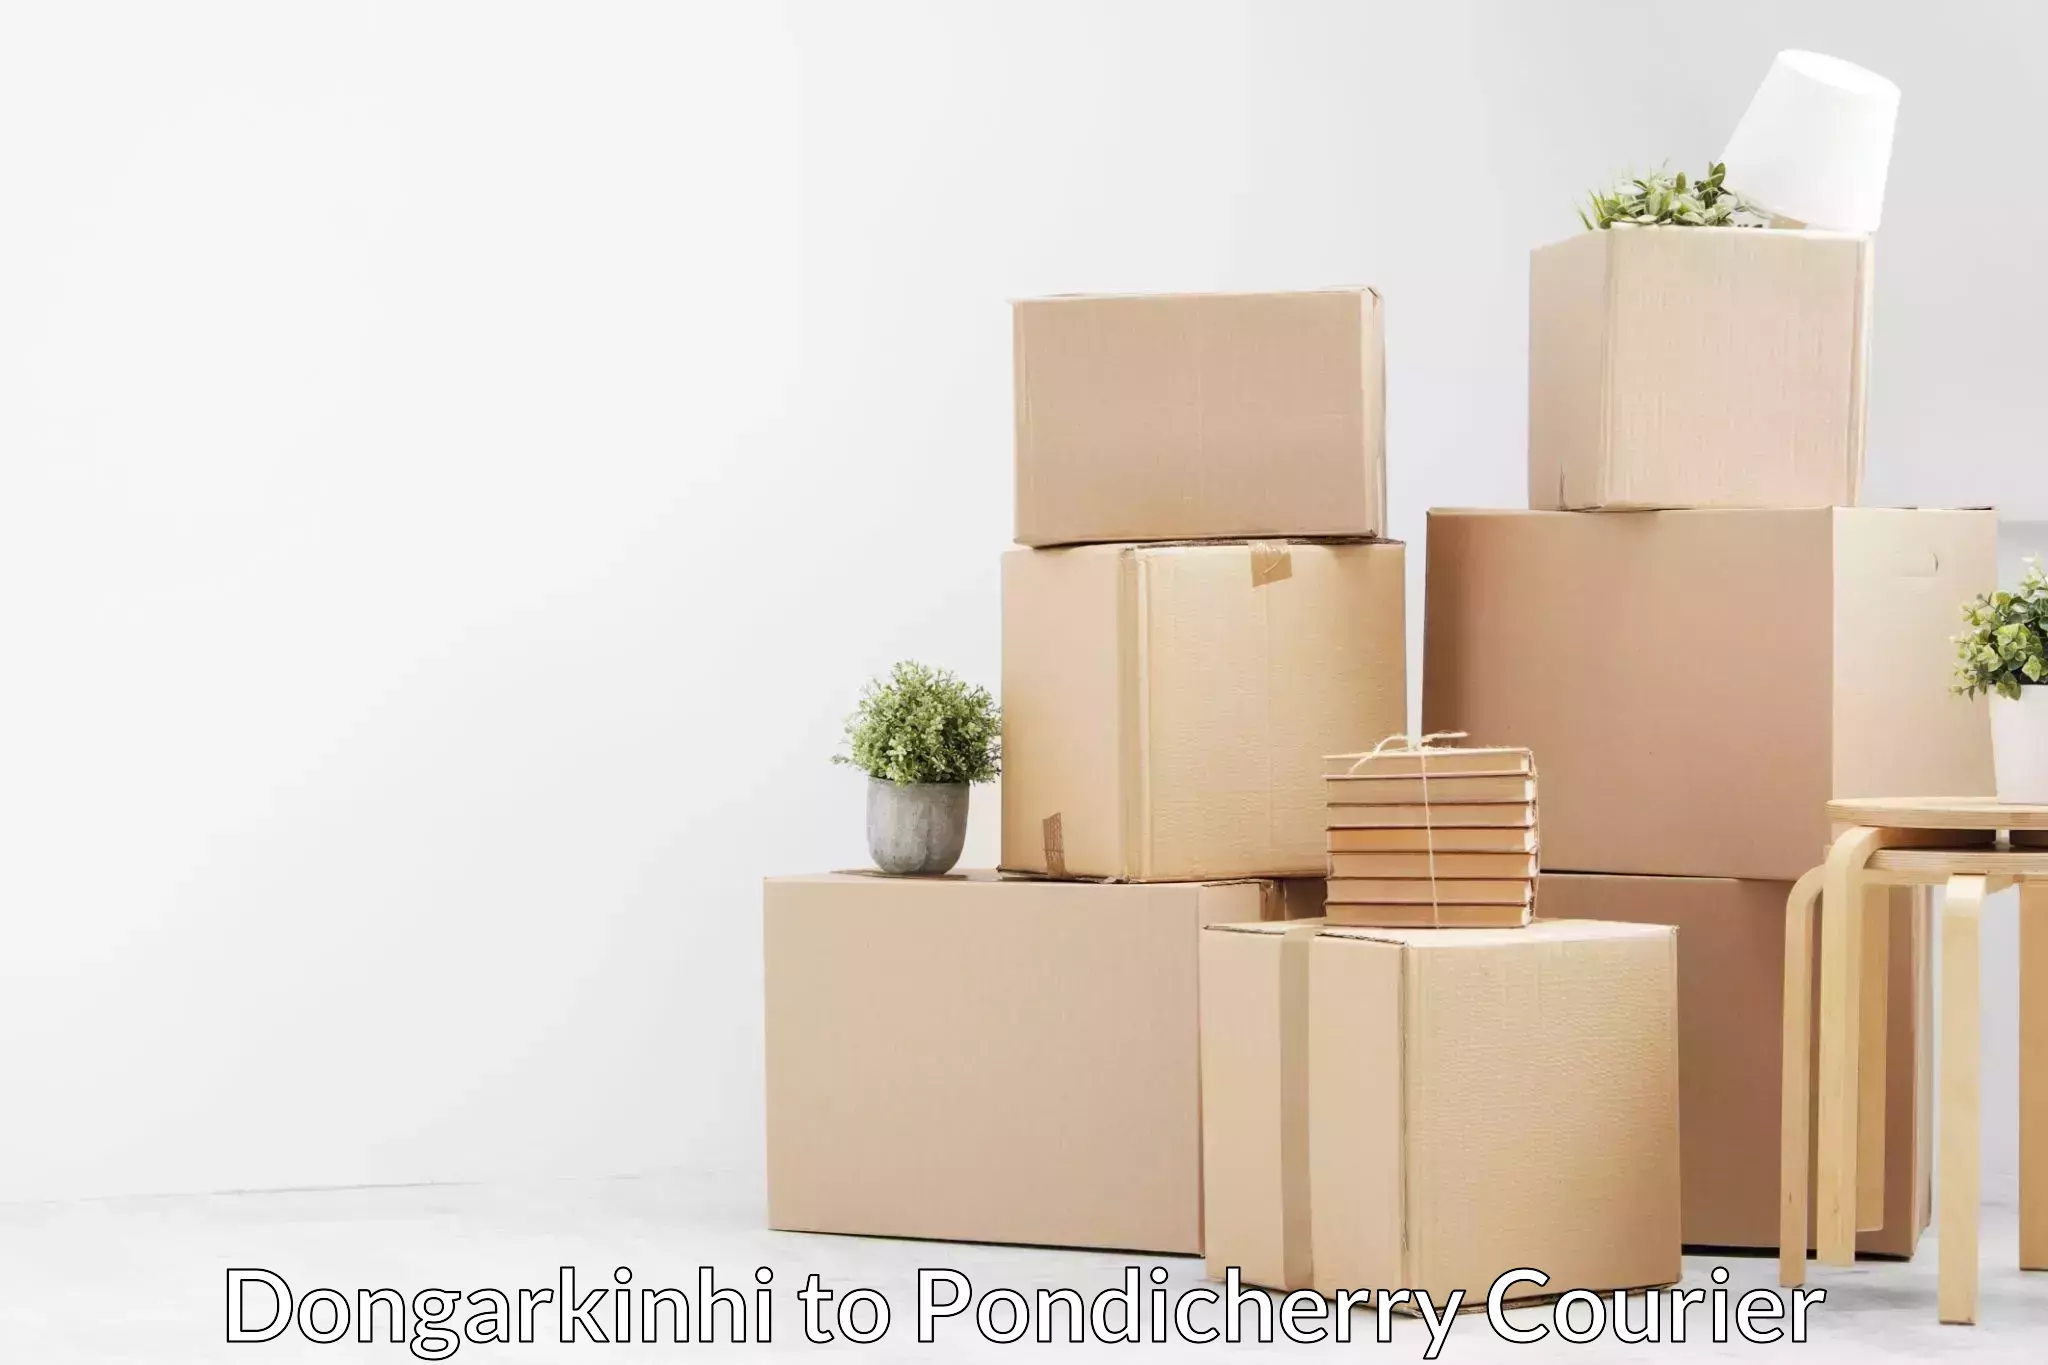 Reliable relocation services Dongarkinhi to Pondicherry University